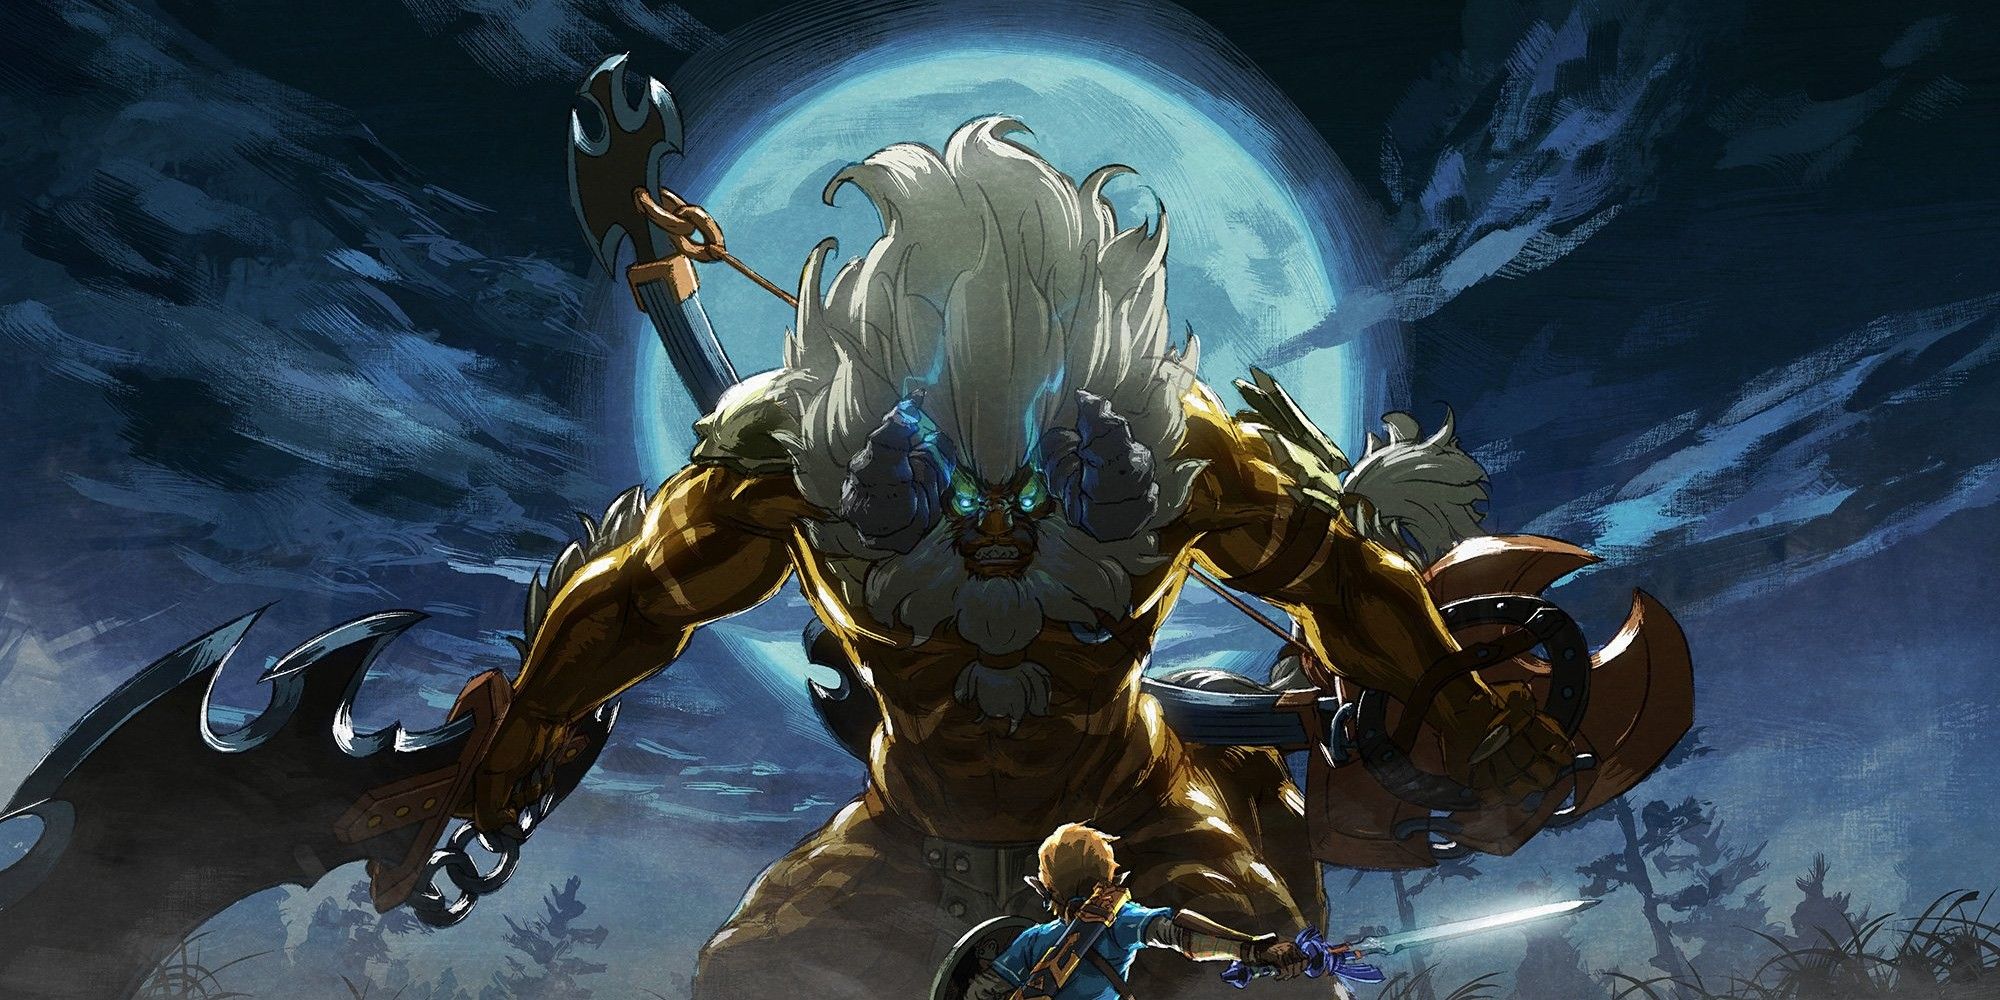 Artwork of a Golden Lynel from Breath of the Wild